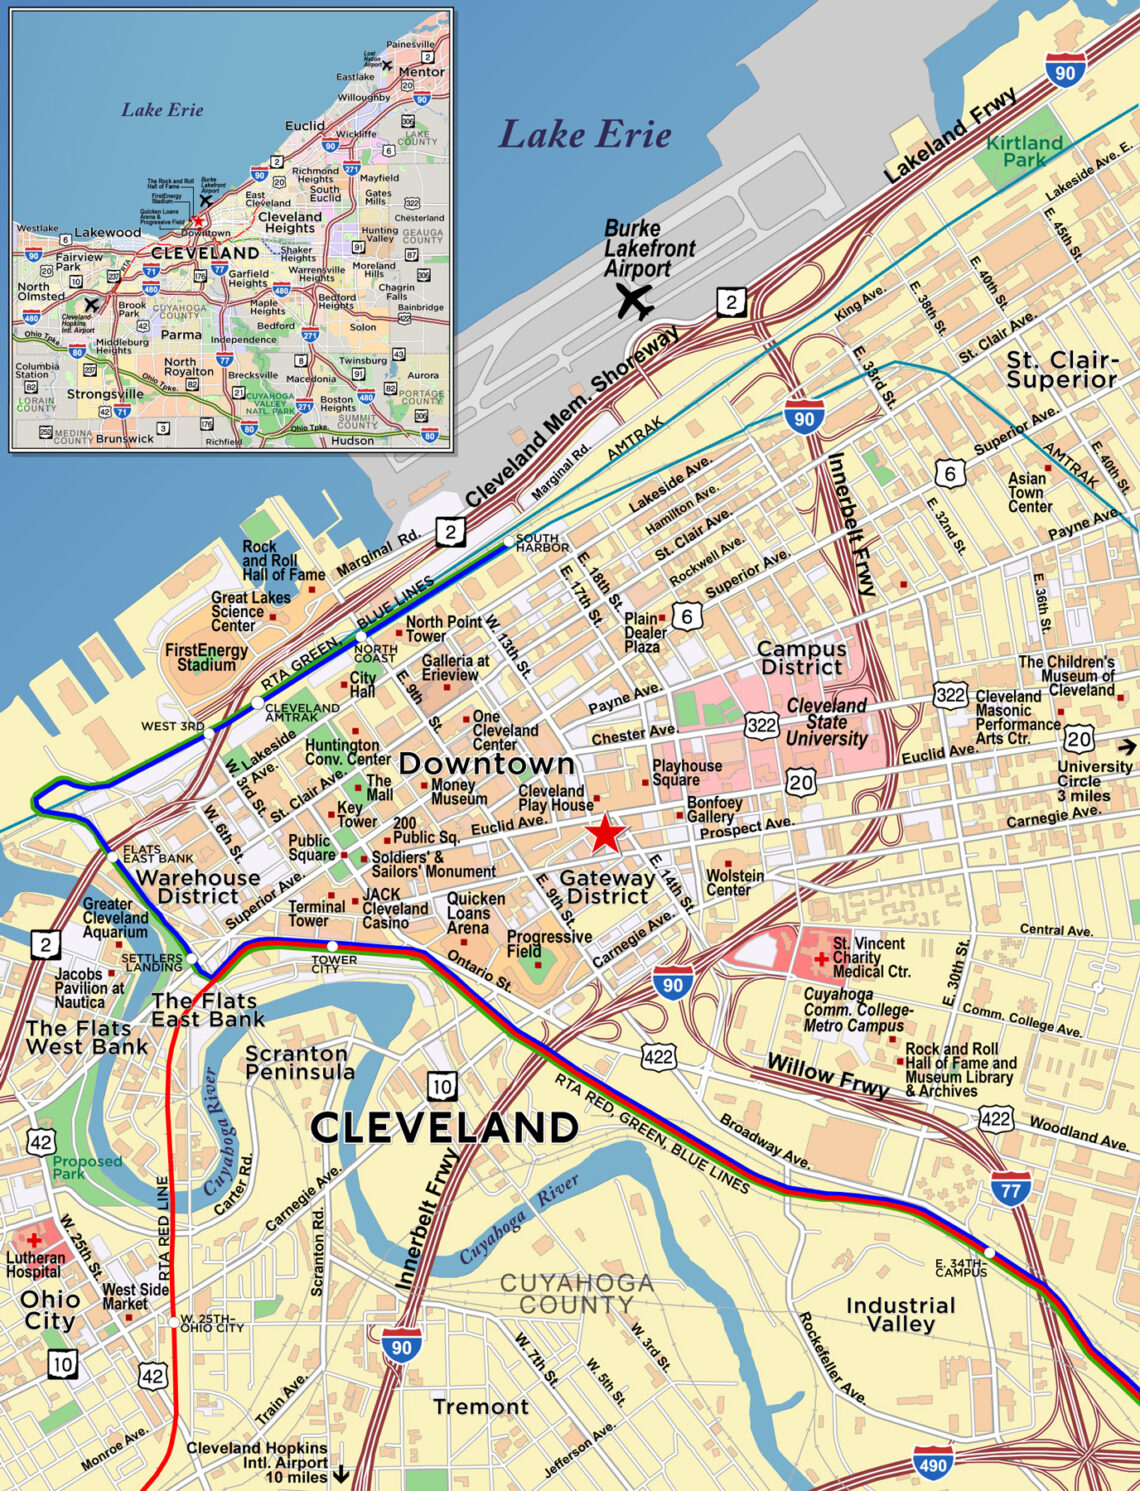 Custom Mapping & GIS Services in Cleveland, OH